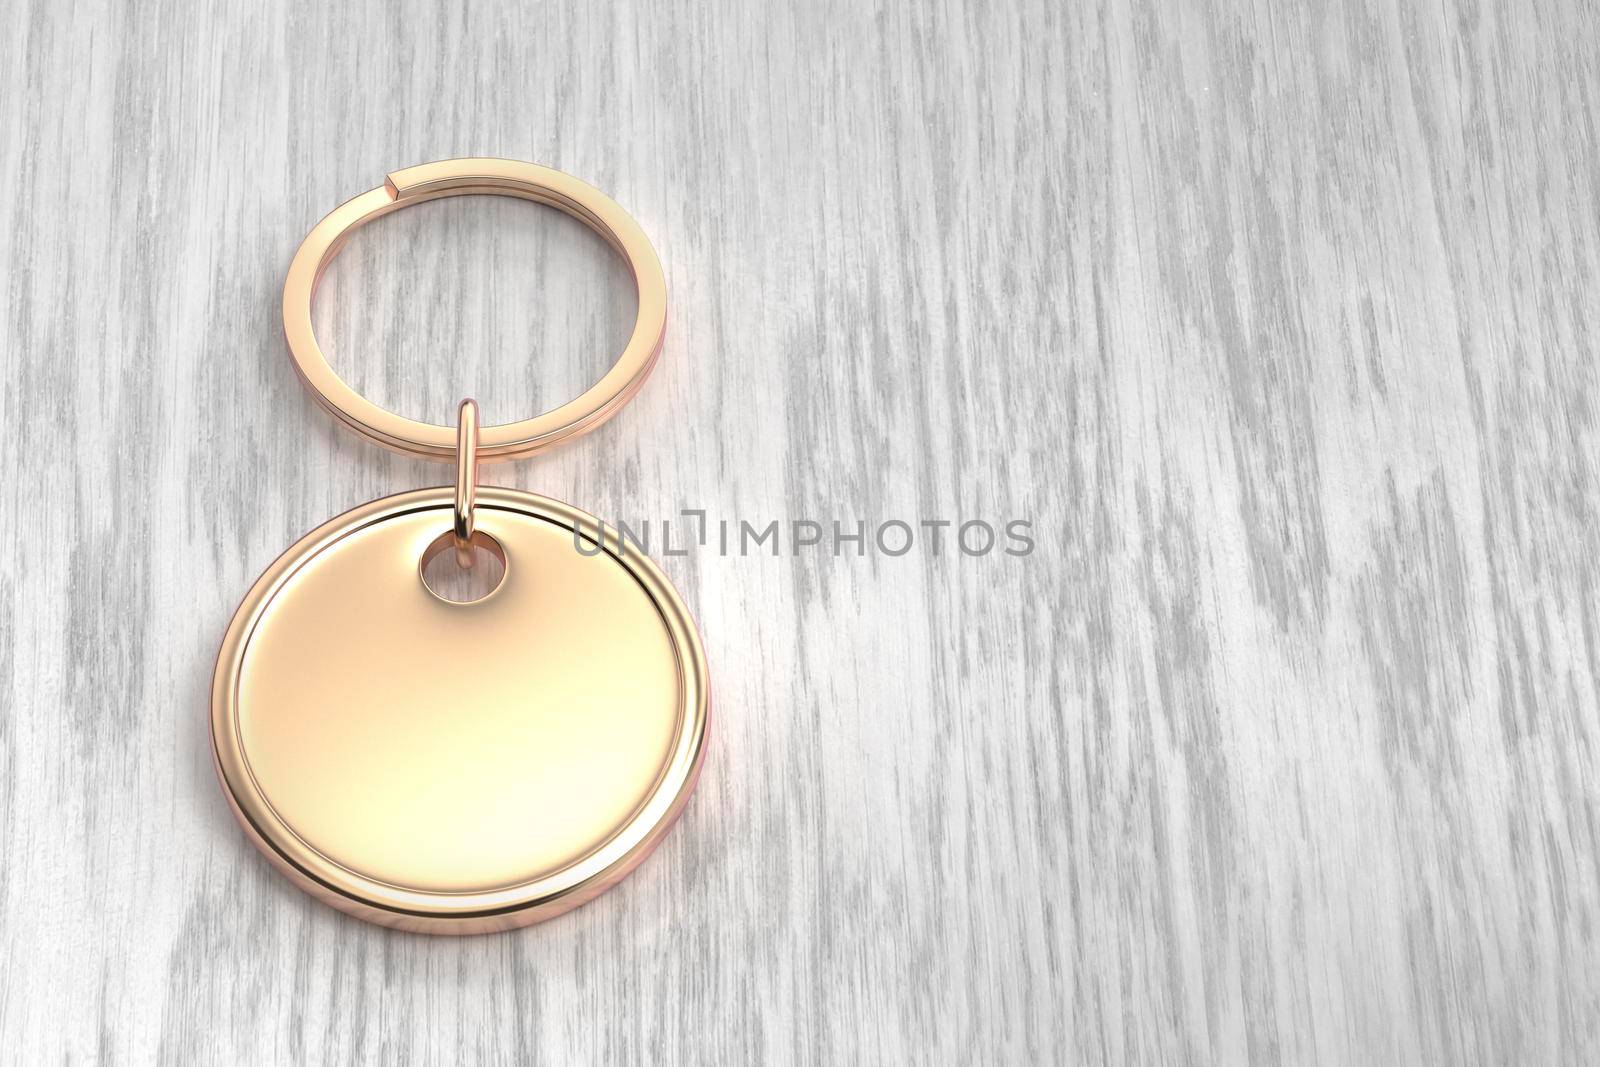 Rose gold round keychain by magraphics